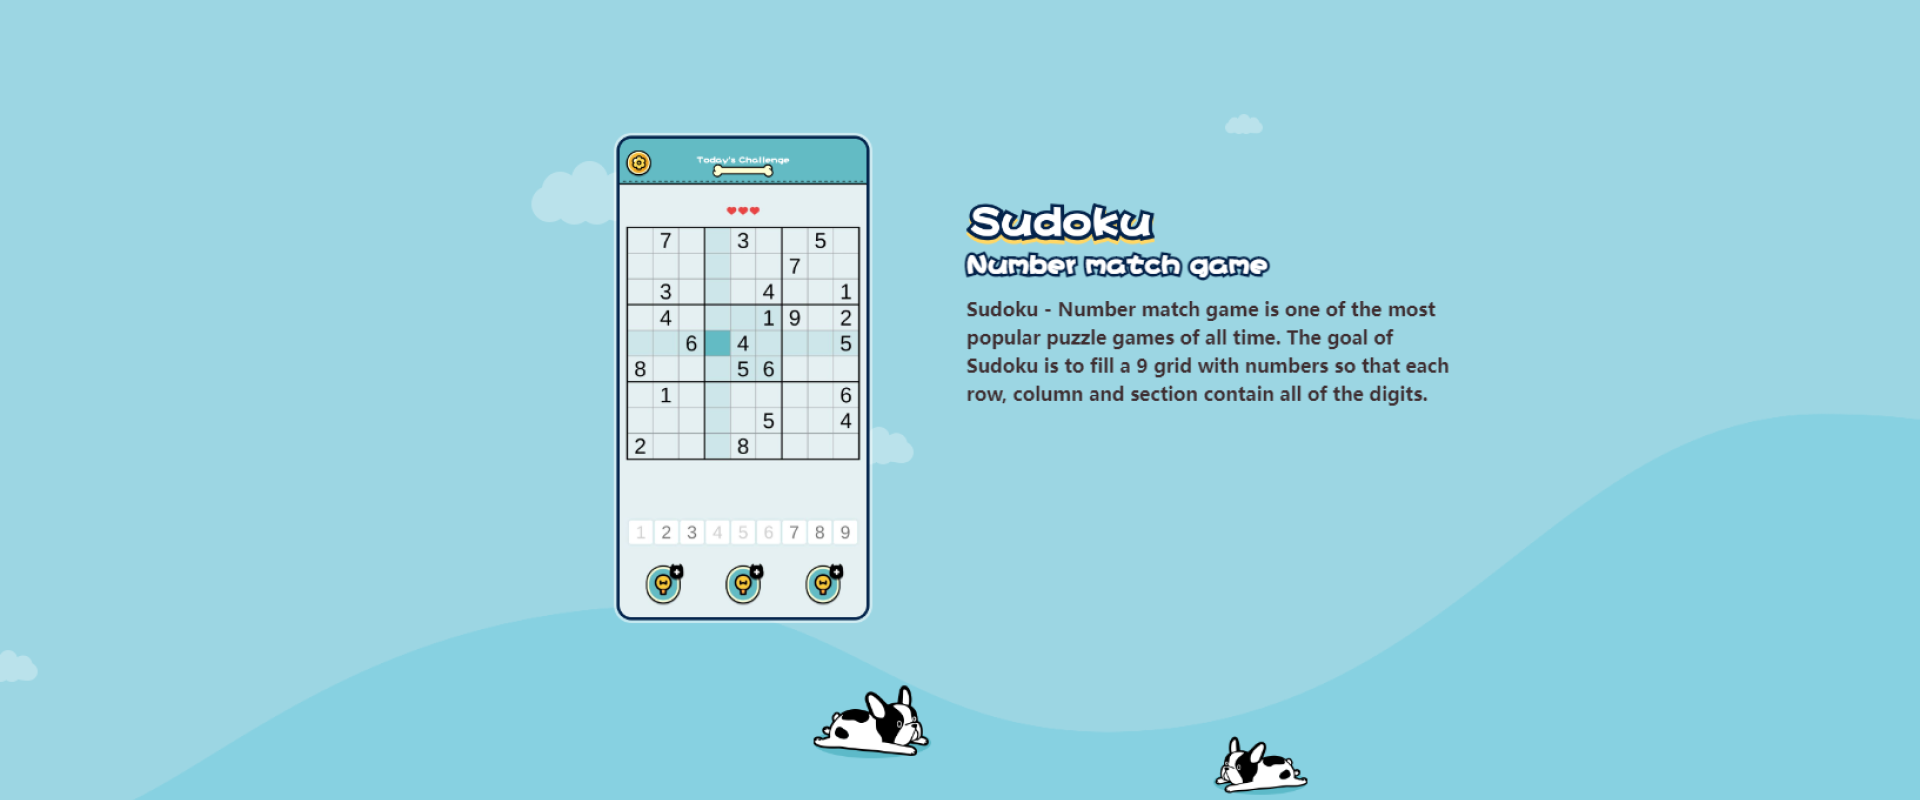 Download & Play Sudoku - Number match games on PC & Mac with NoxPlayer (Emulator)